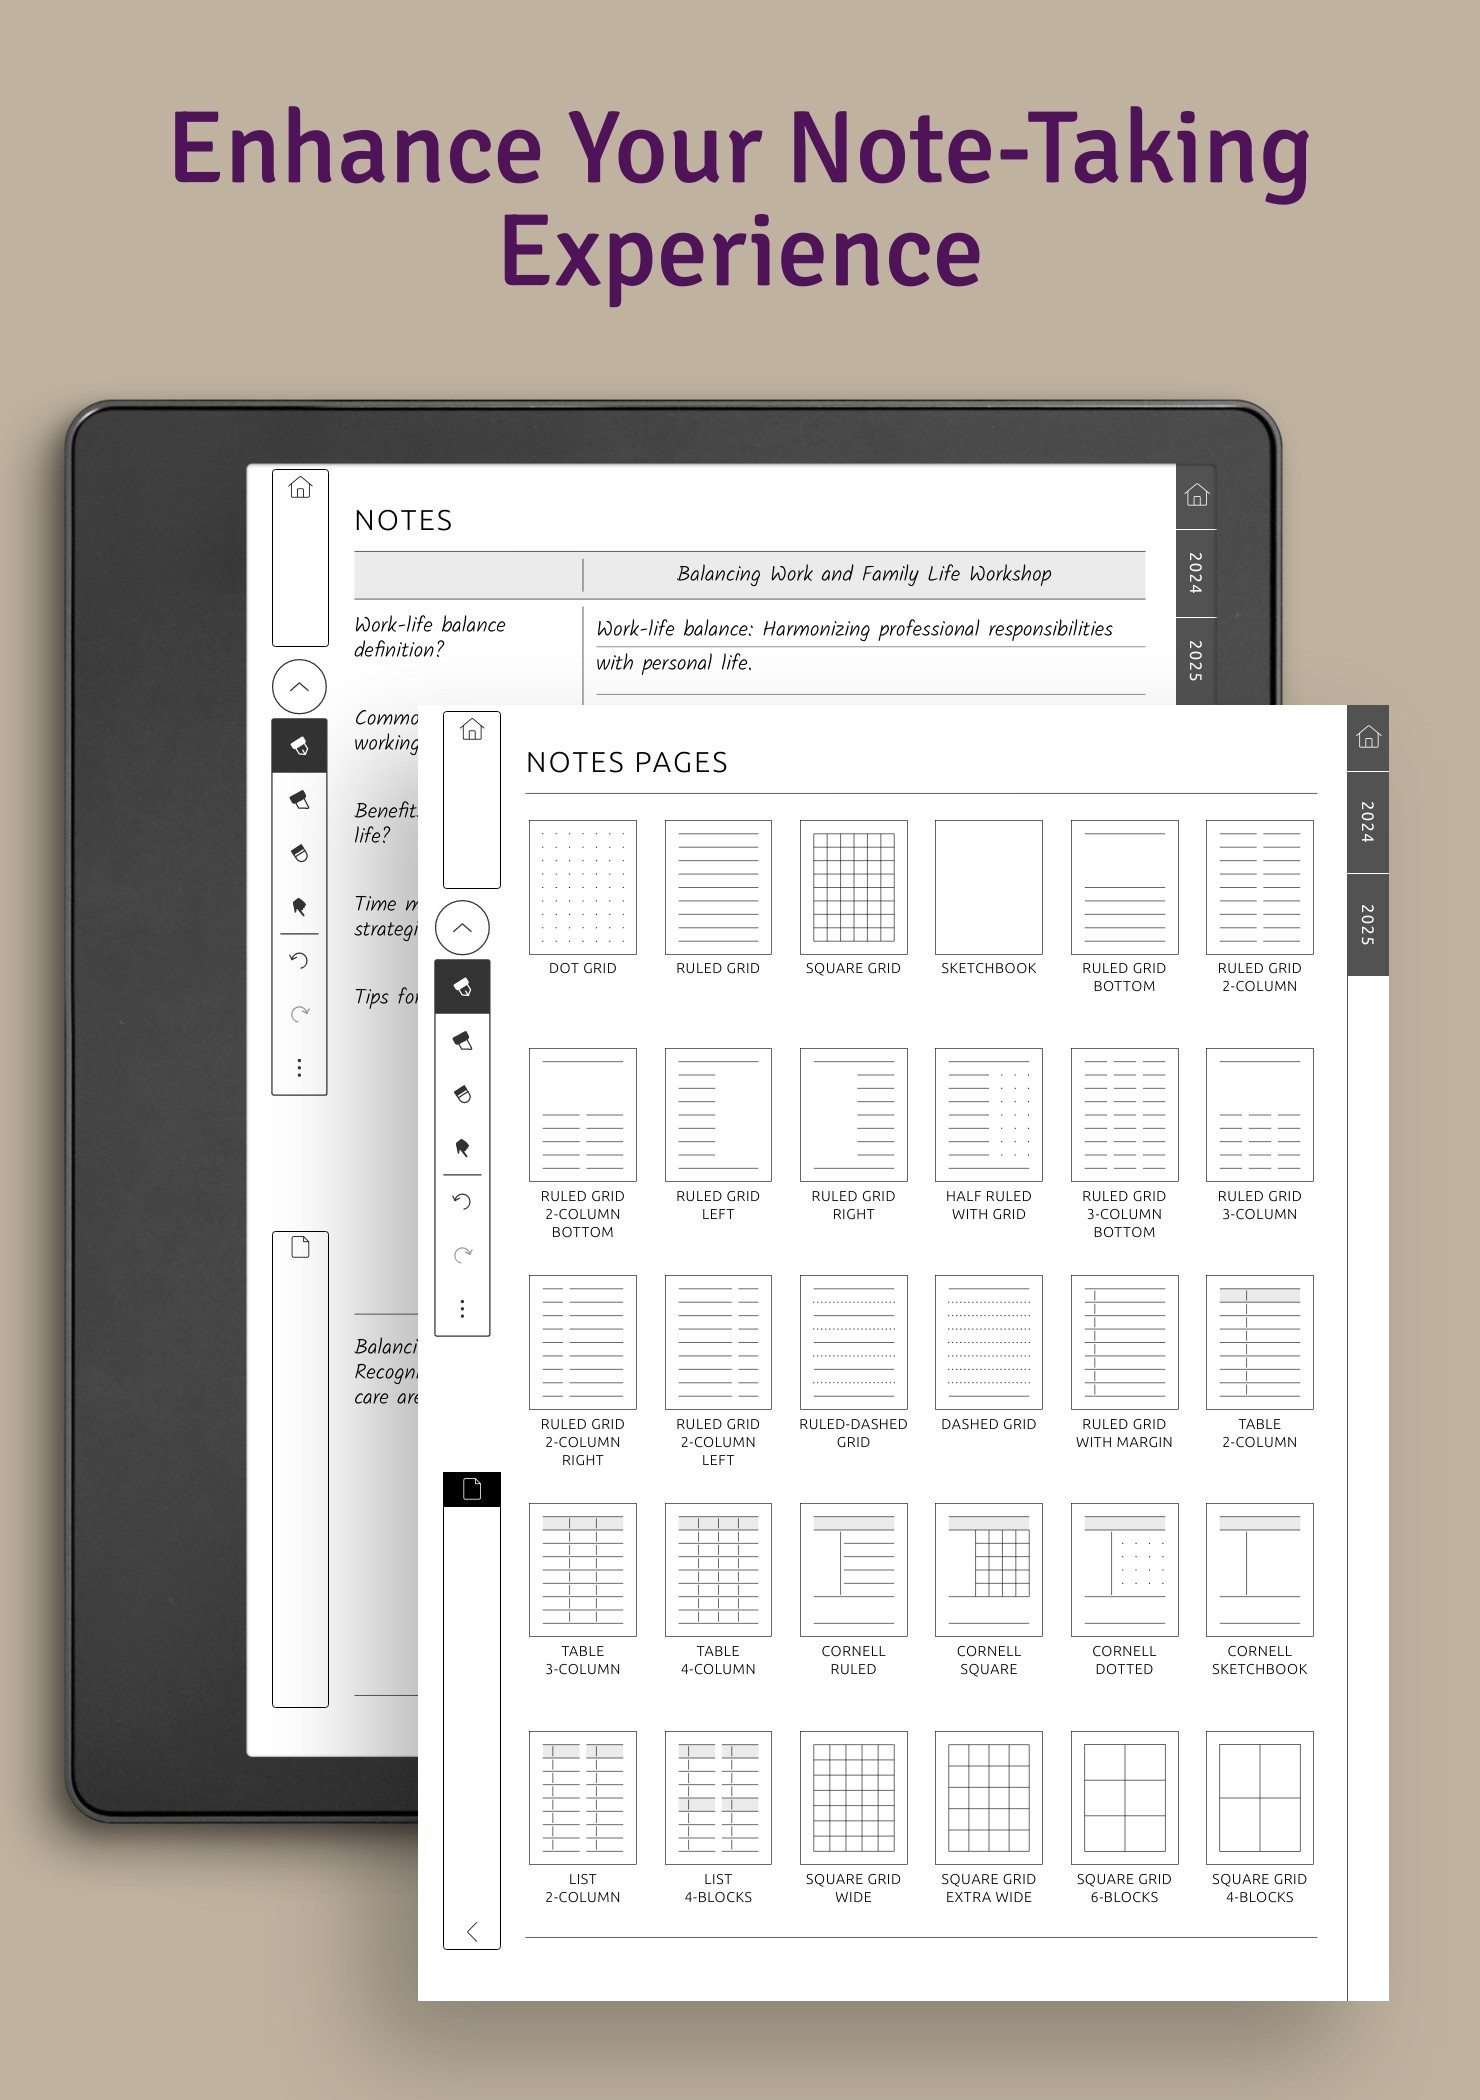 Revamp your note-taking